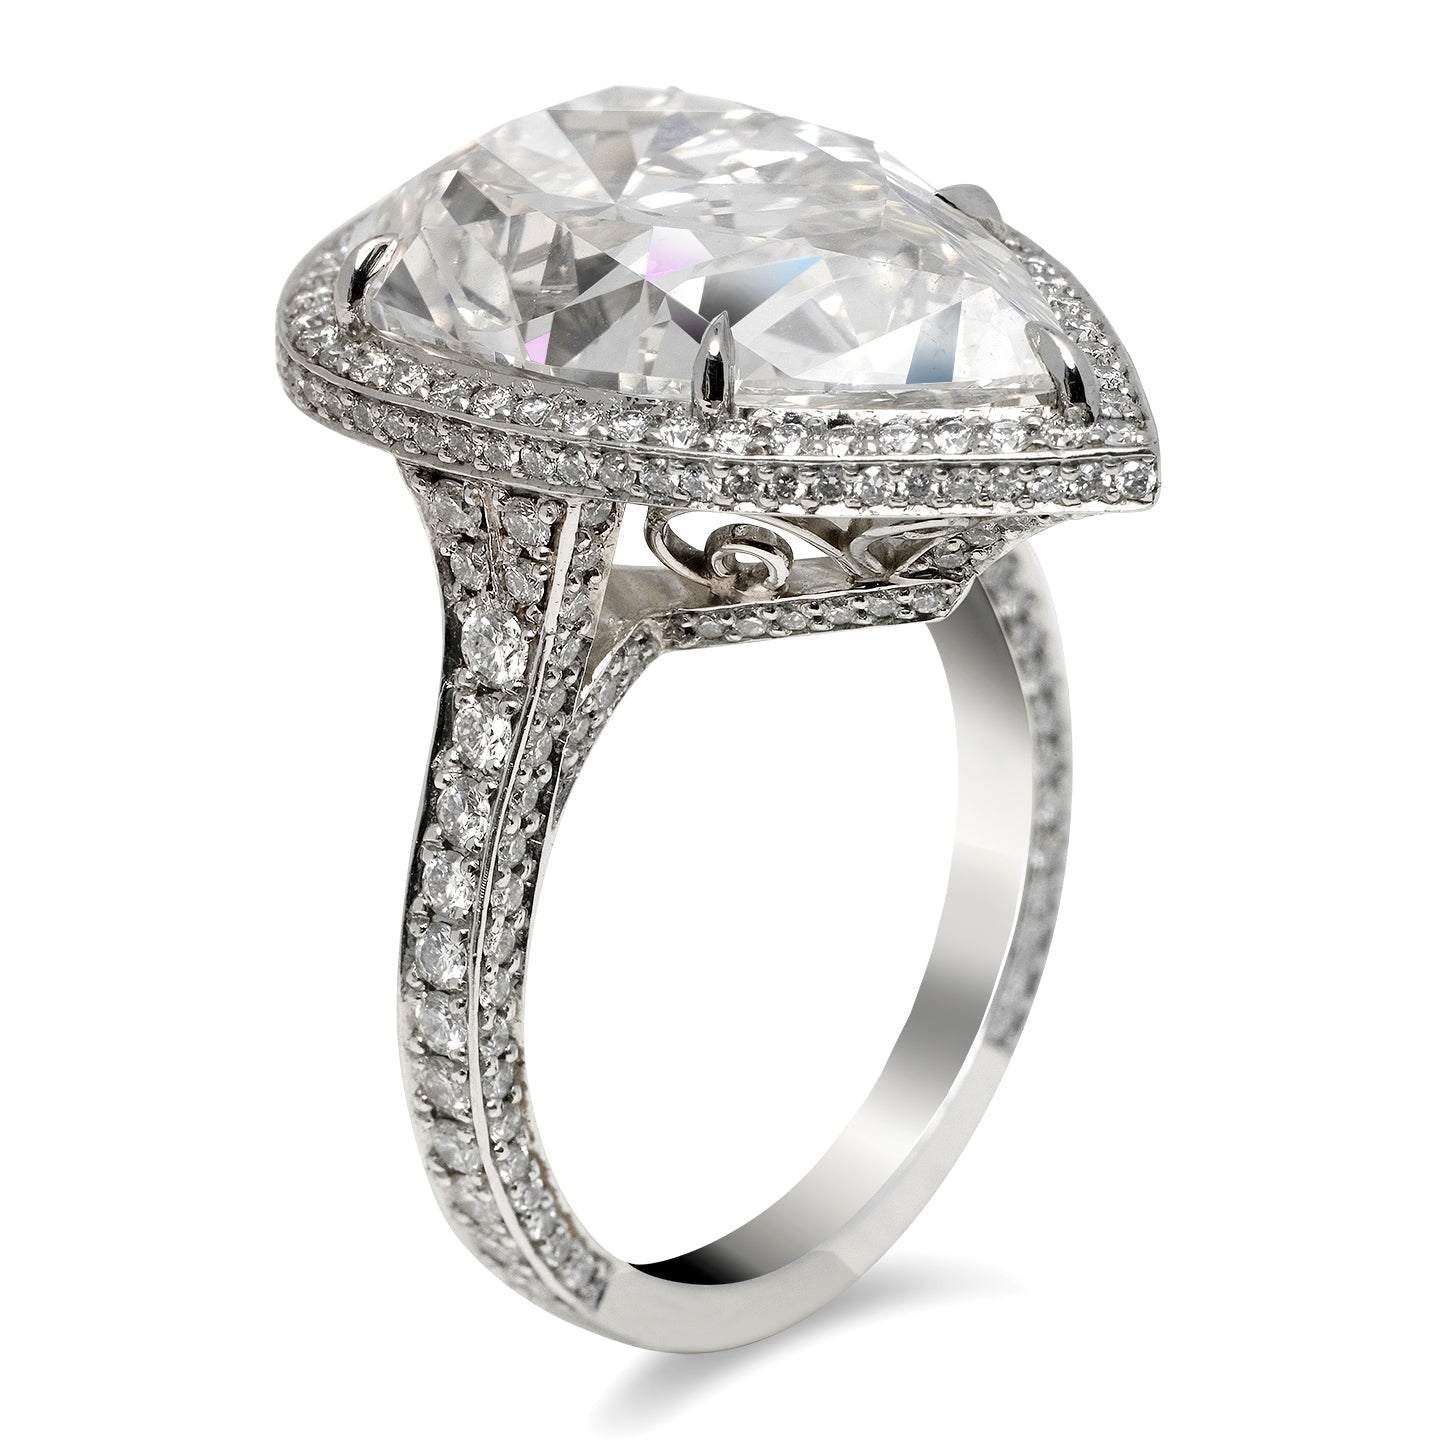 Diamond Ring Pear Shape Cut 12 Carat Halo Ring in Platinum Side View